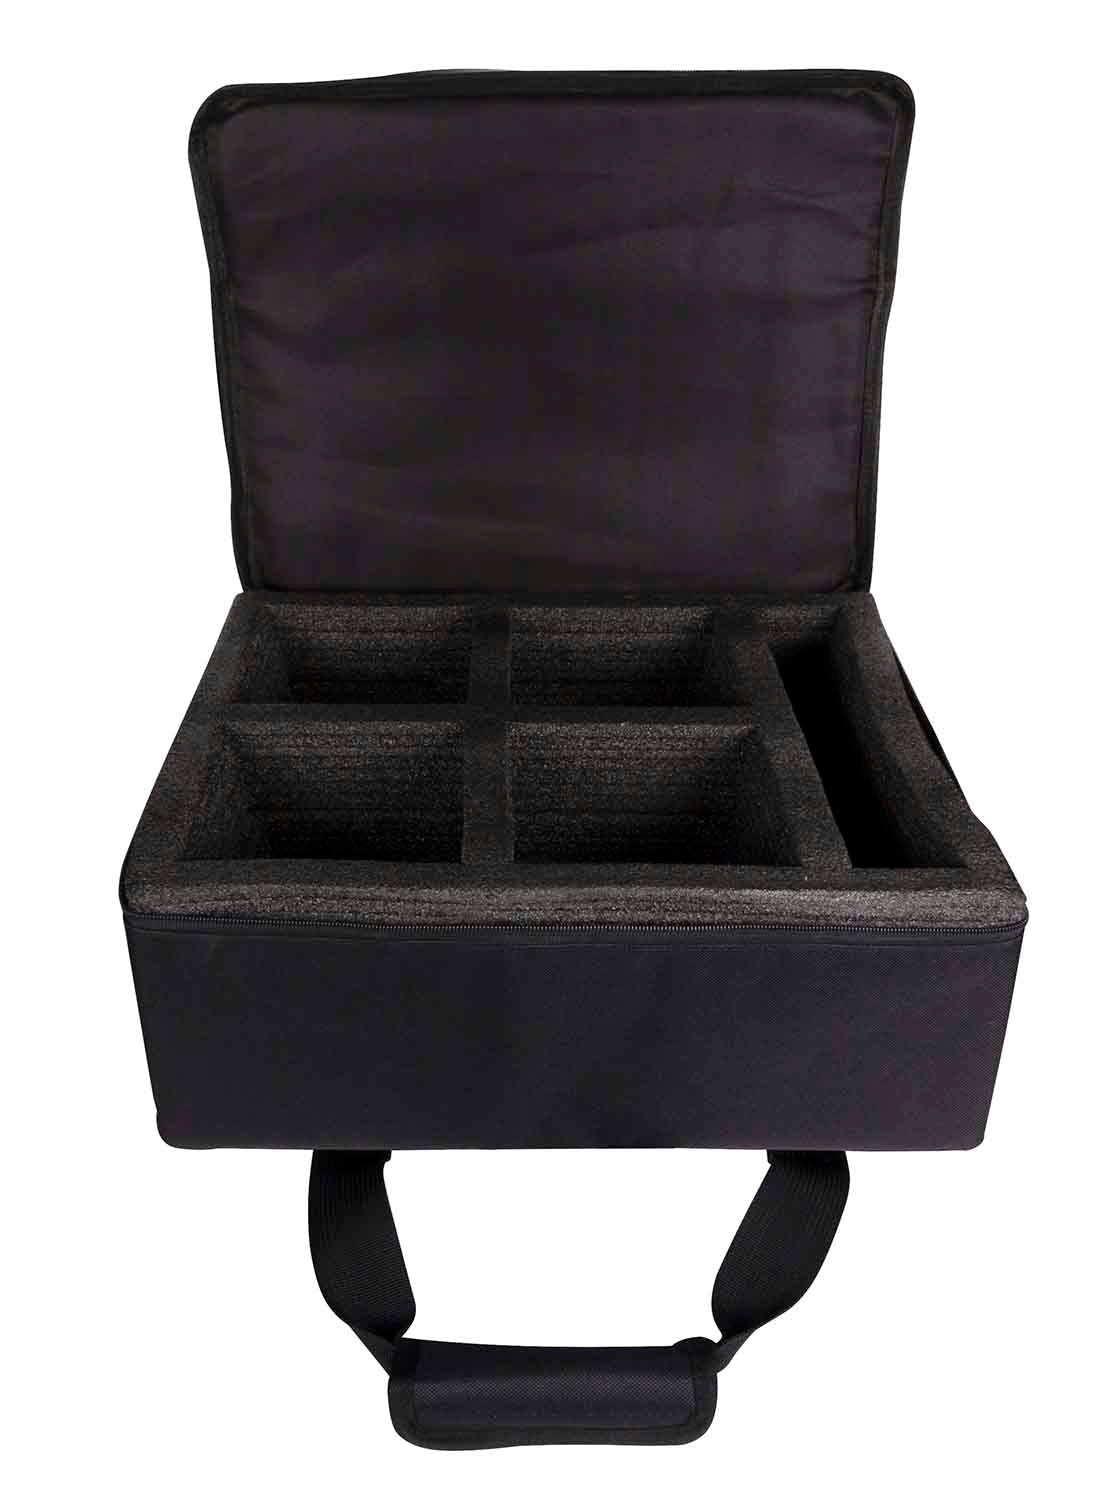 B-Stock: Colorkey CKW-6024 MobilePar Mini Hex 4 Bundle with Carrying Case - 4-Pack - Hollywood DJ